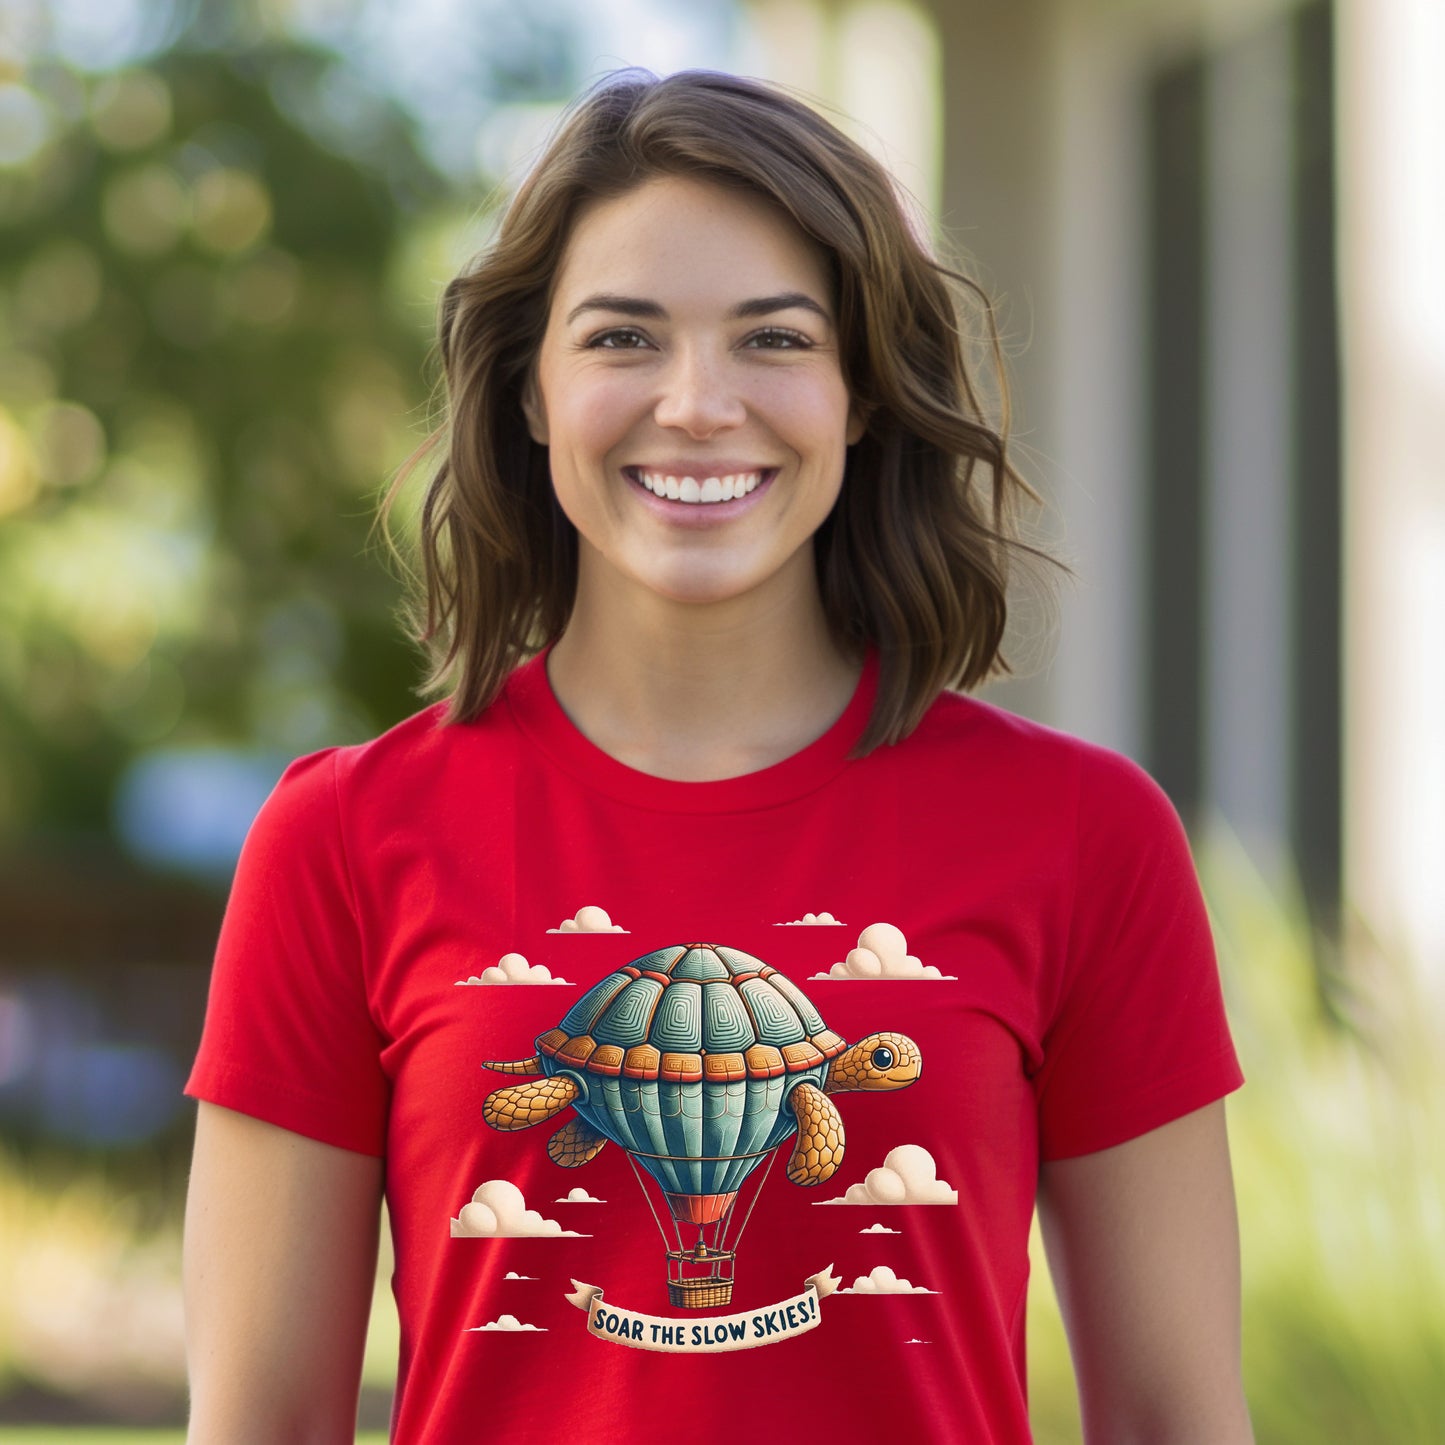 Turtle Hot Air Balloon Tshirt - Get There Slow! Funny Turtle Hot Air Balloon T Shirt, Funny Tshirt Design, Hot Air Balloon TShirt, TShirt